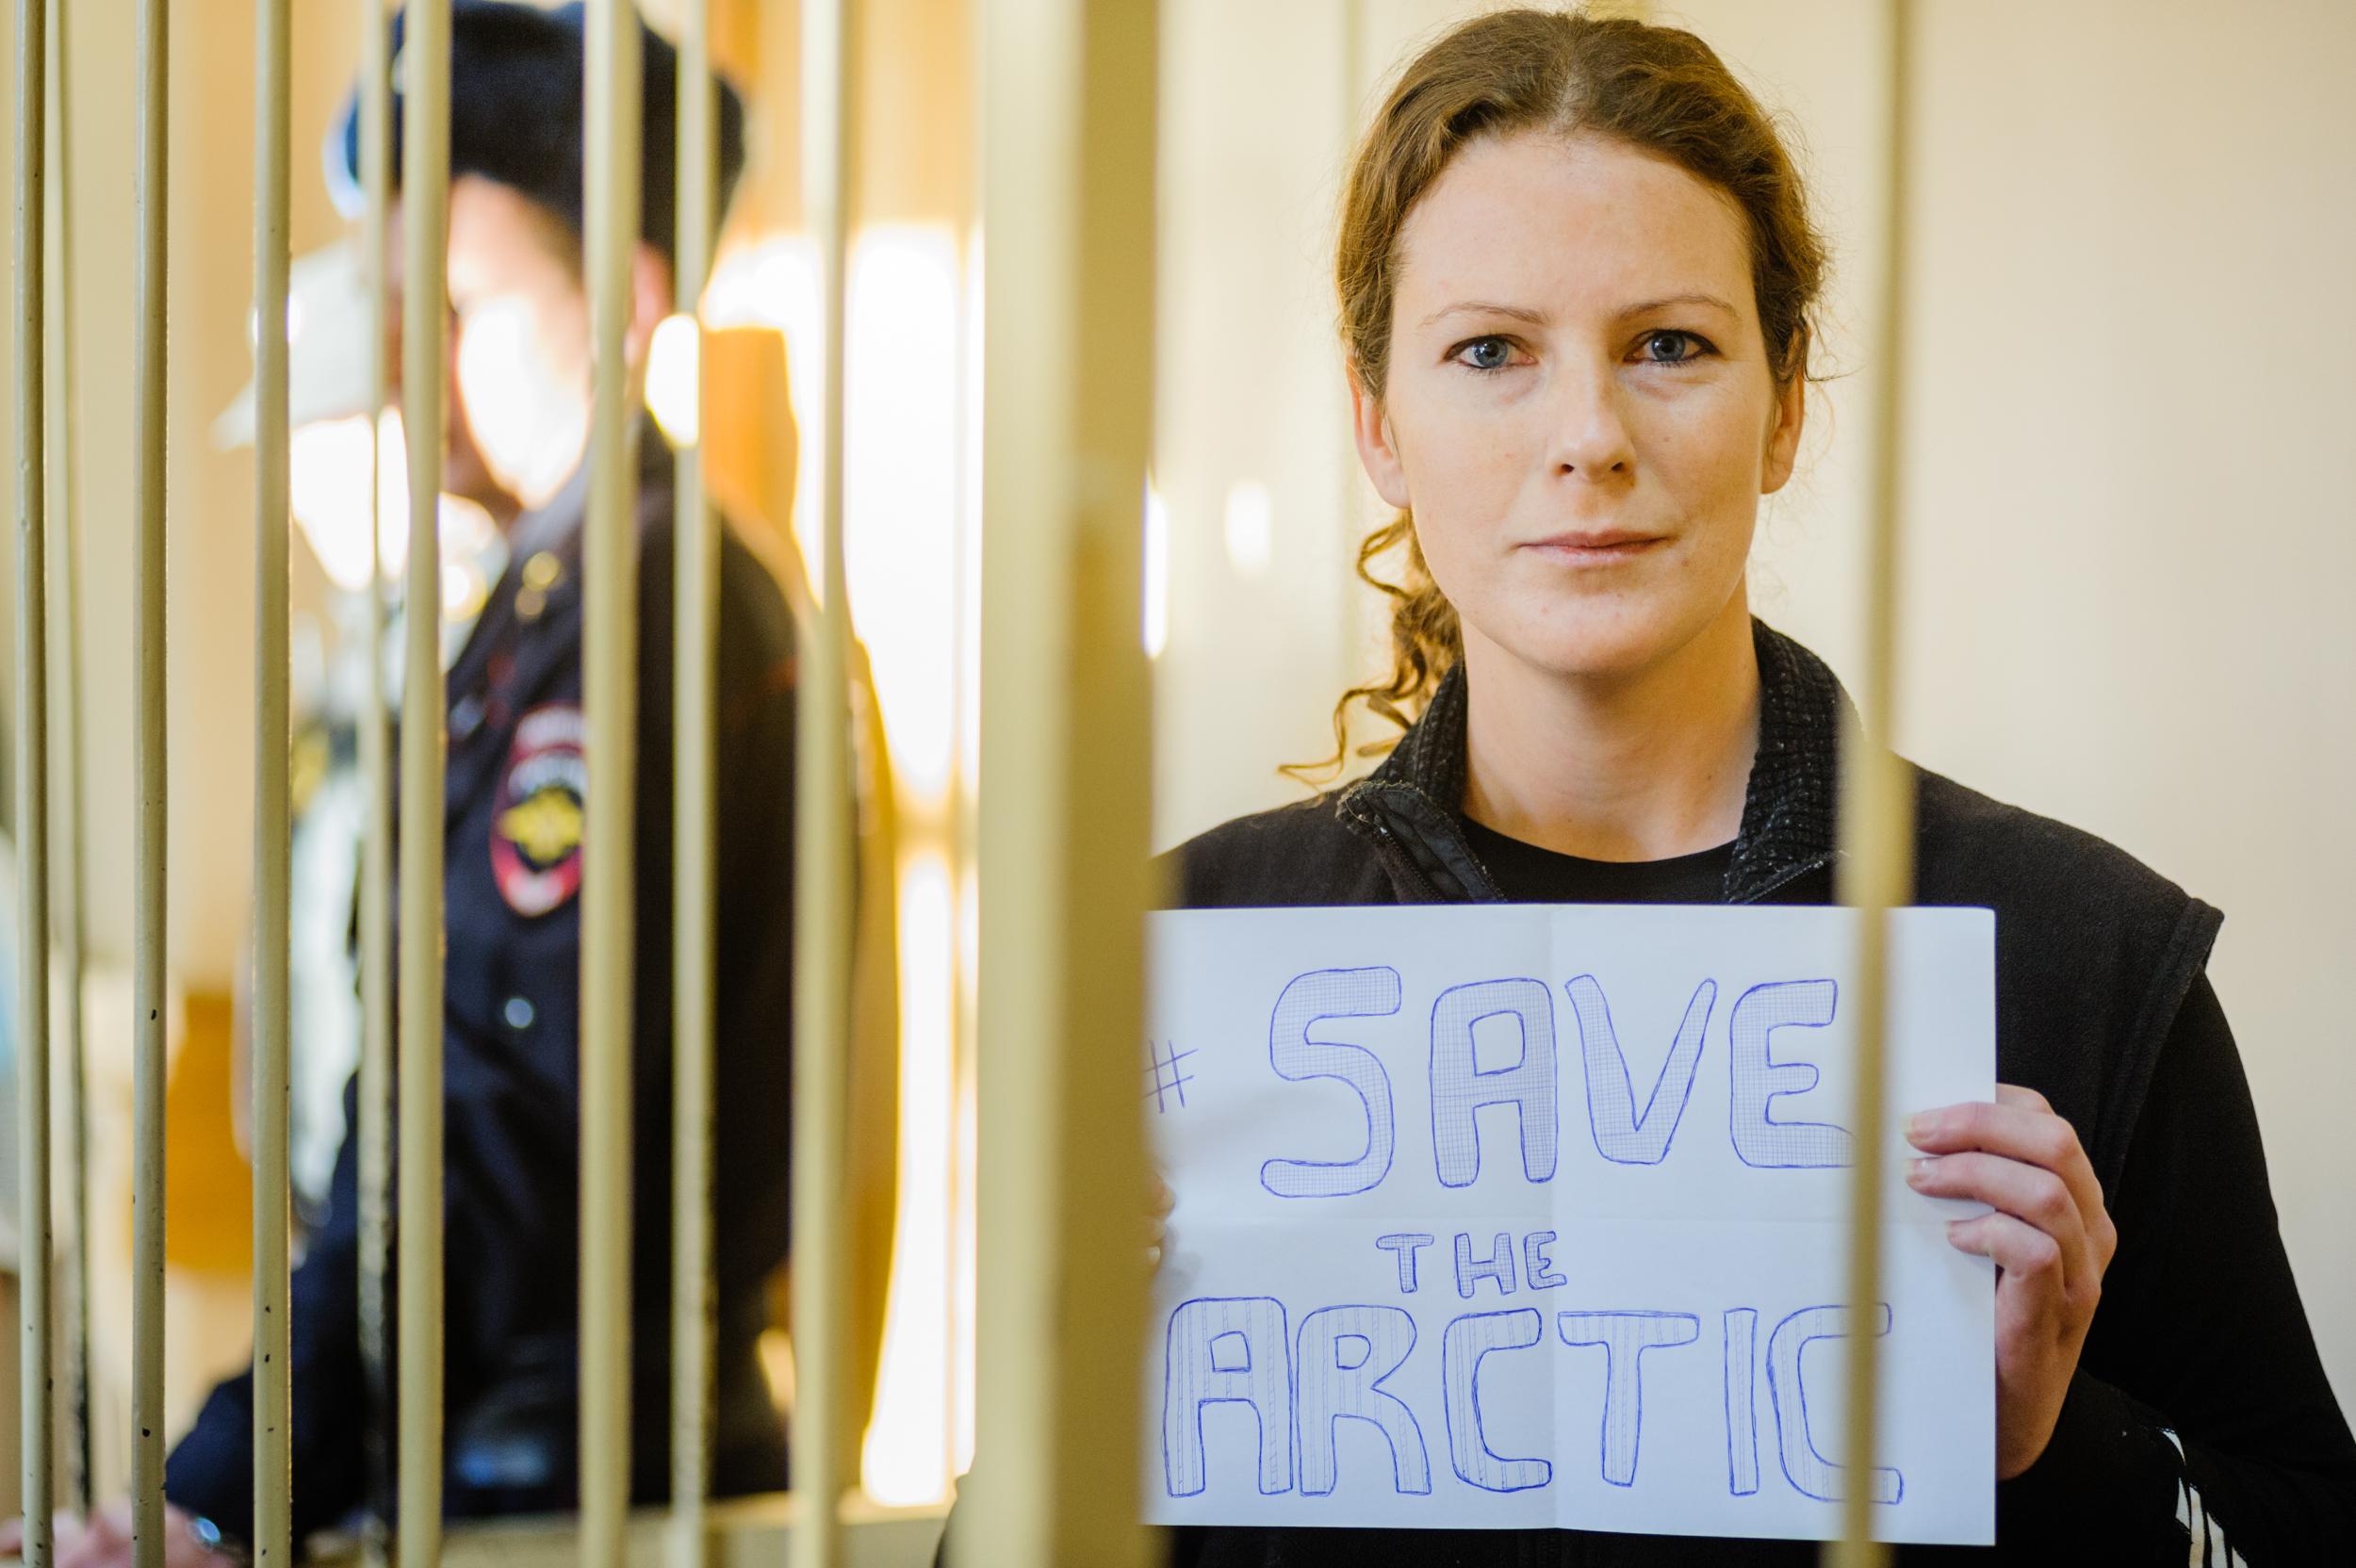 A woman behind bars looks into the camera with a serious expression. She holds up a sign saying 'save the Arctic'.